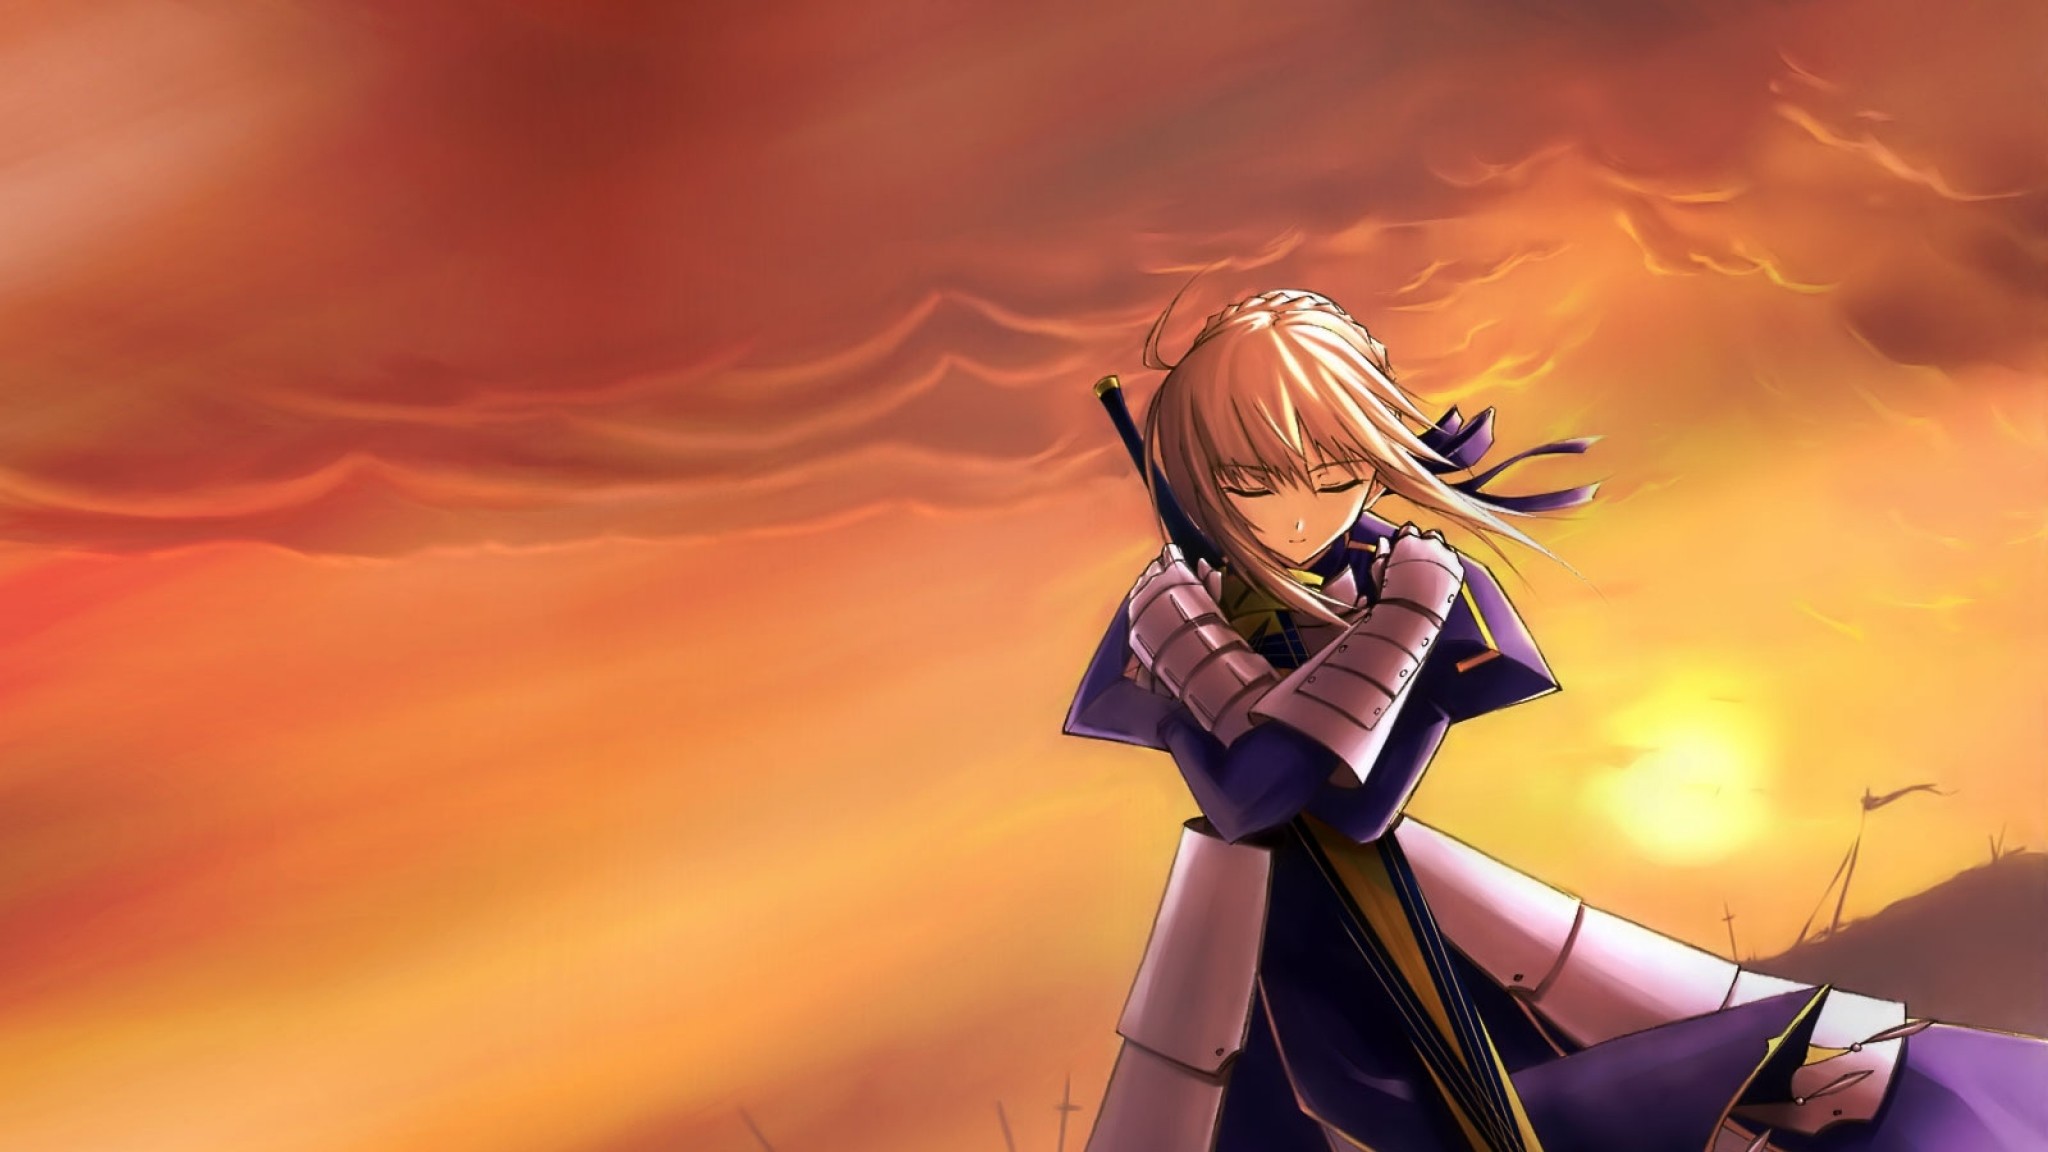 2048x1152  Wallpaper fate stay night, saber, girl, sunset, armor